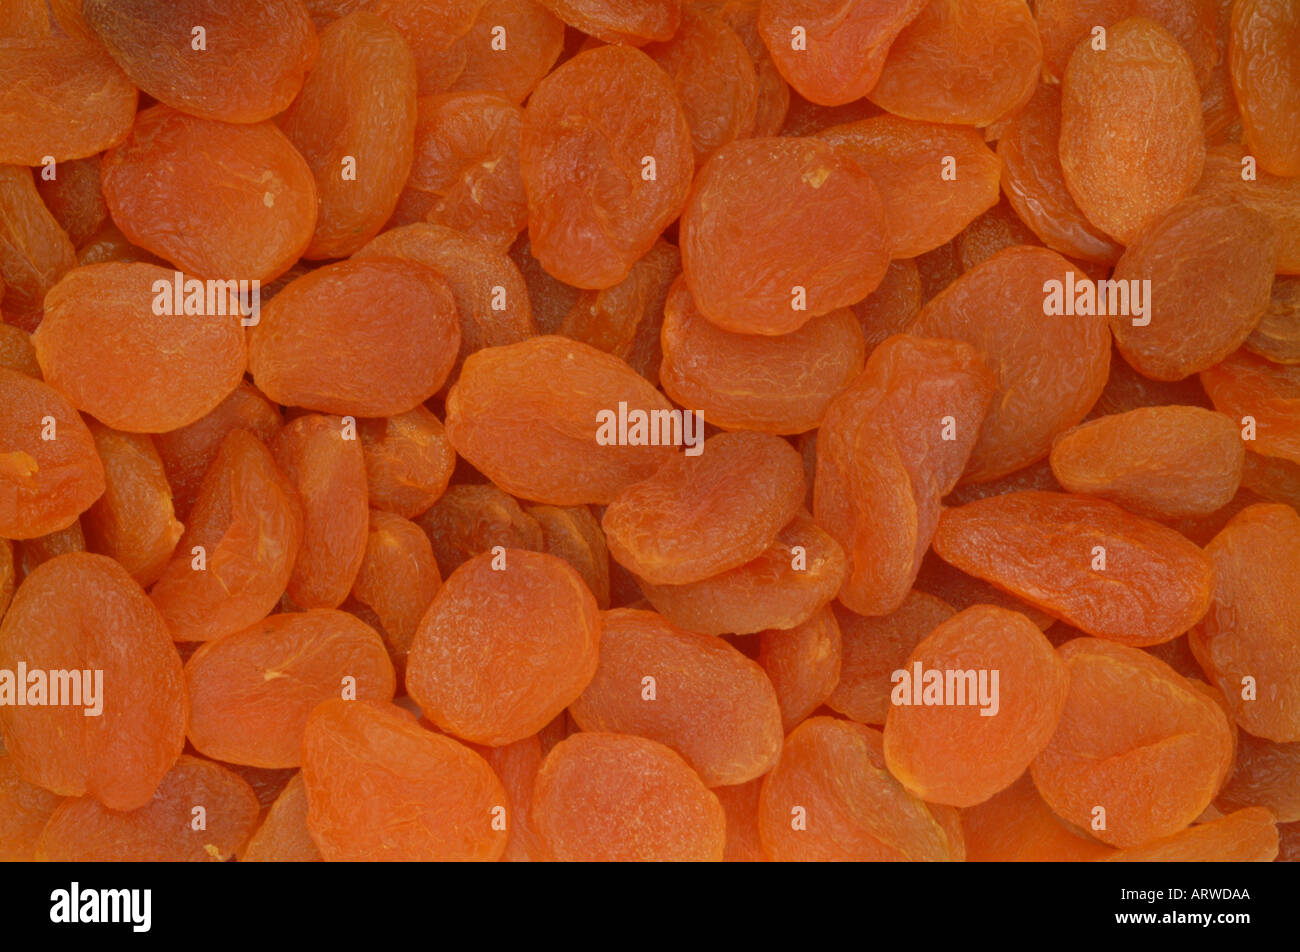 apricot dried whole fresh ingredient Stock Photo